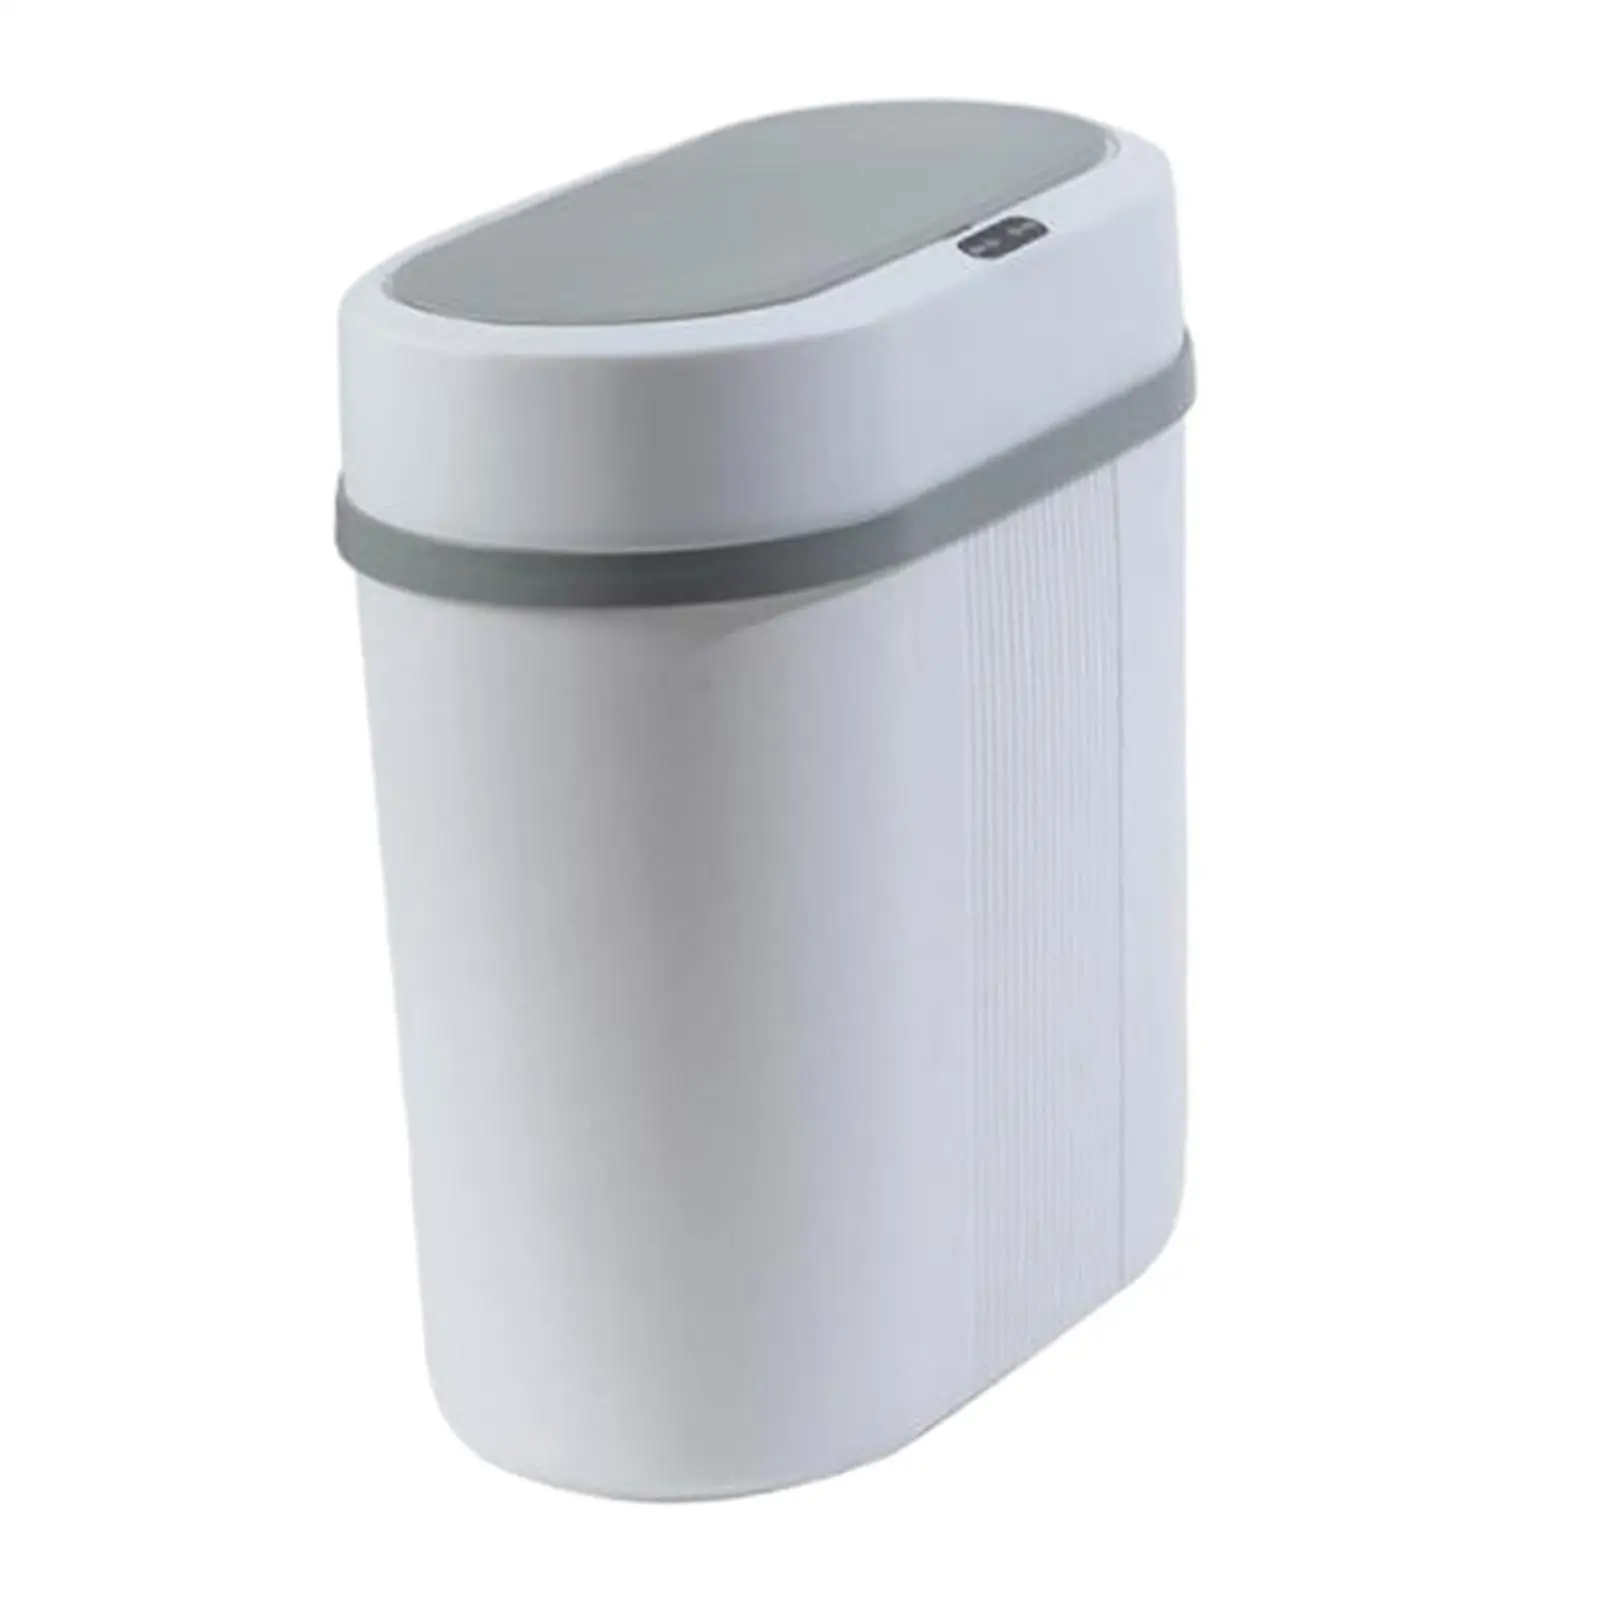 Intelligent Sensor Touchless Narrow Trash Can 12L 15cm Width for Kitchen